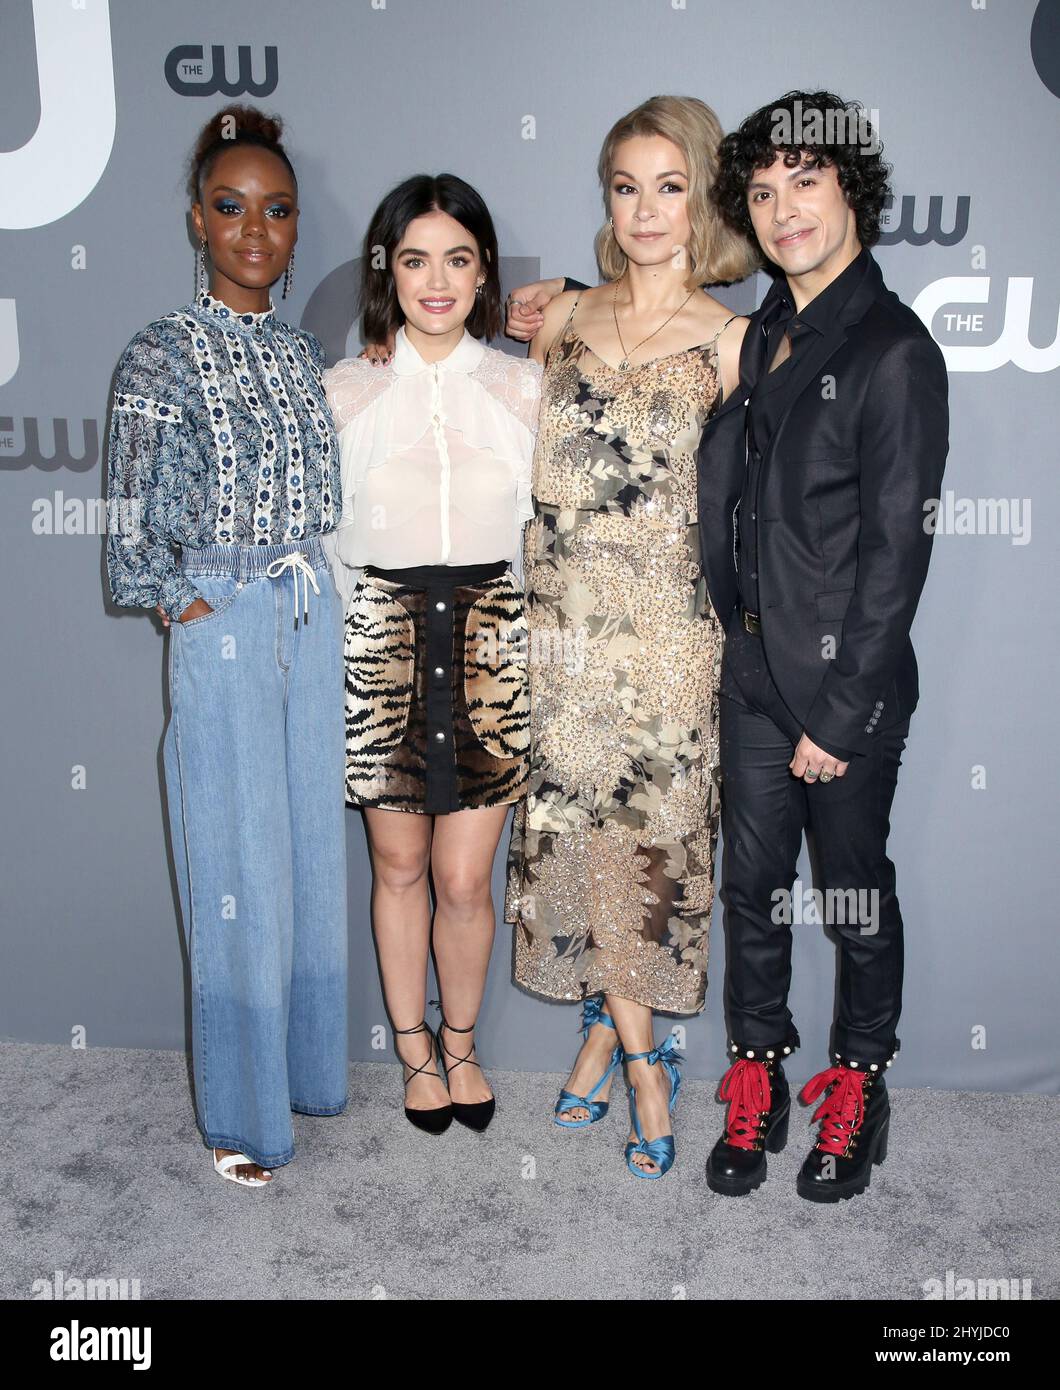 Ashleigh Murra, Lucy Hale, Julia Chan & Jonny Beauchamp attending The CW Network 2019 Upfront held at New York City Center on May 16, 2019 in New York City, USA. Stock Photo